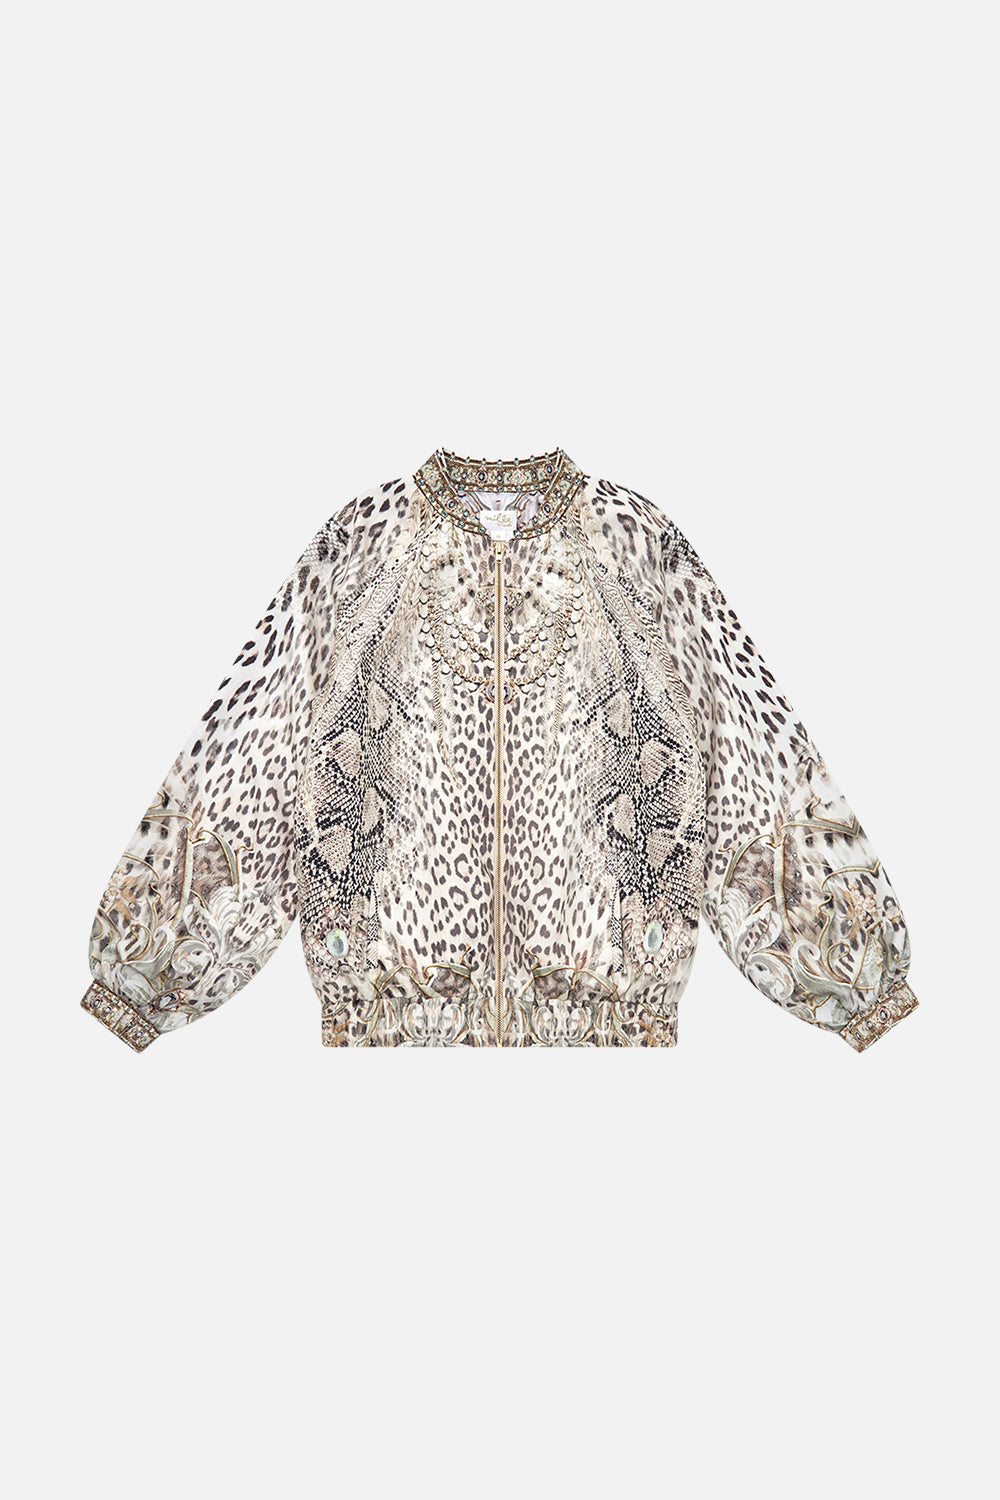 Milla by CAMILLA kids bomber jacket in Looking Glass Houses print